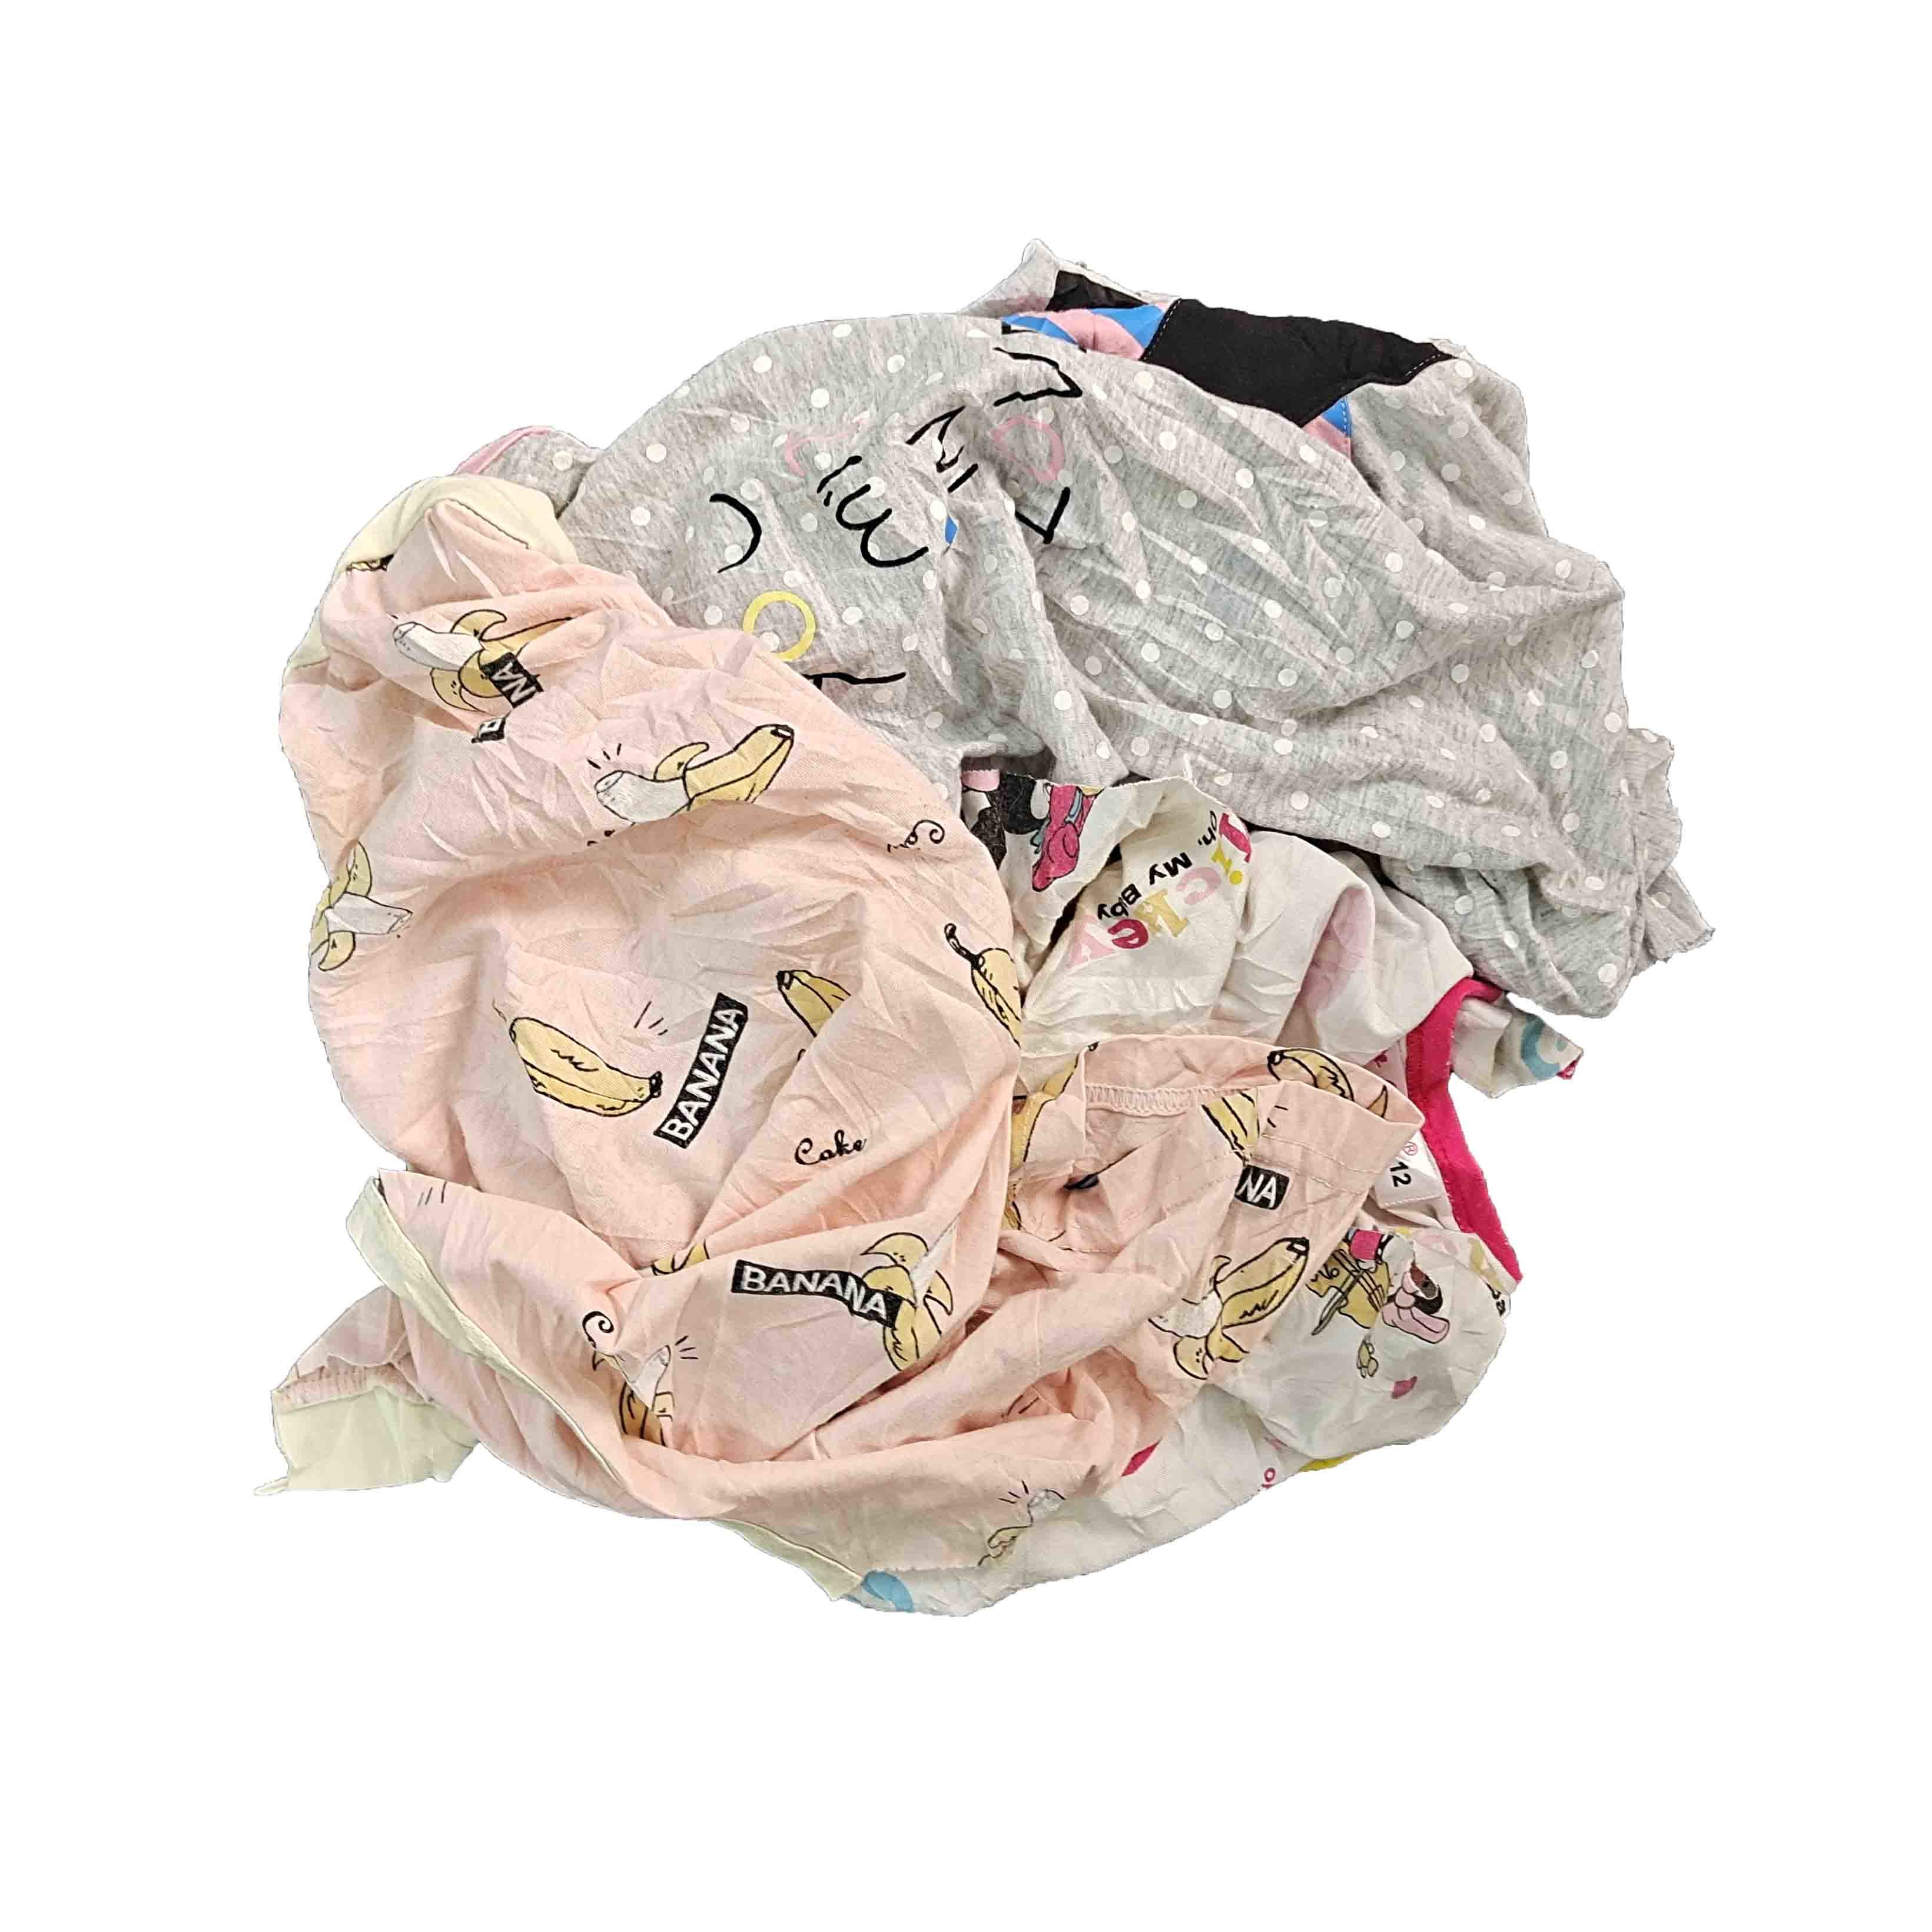 Strong Oil Absorbency 100kg/Bale Mixed Cotton Rags